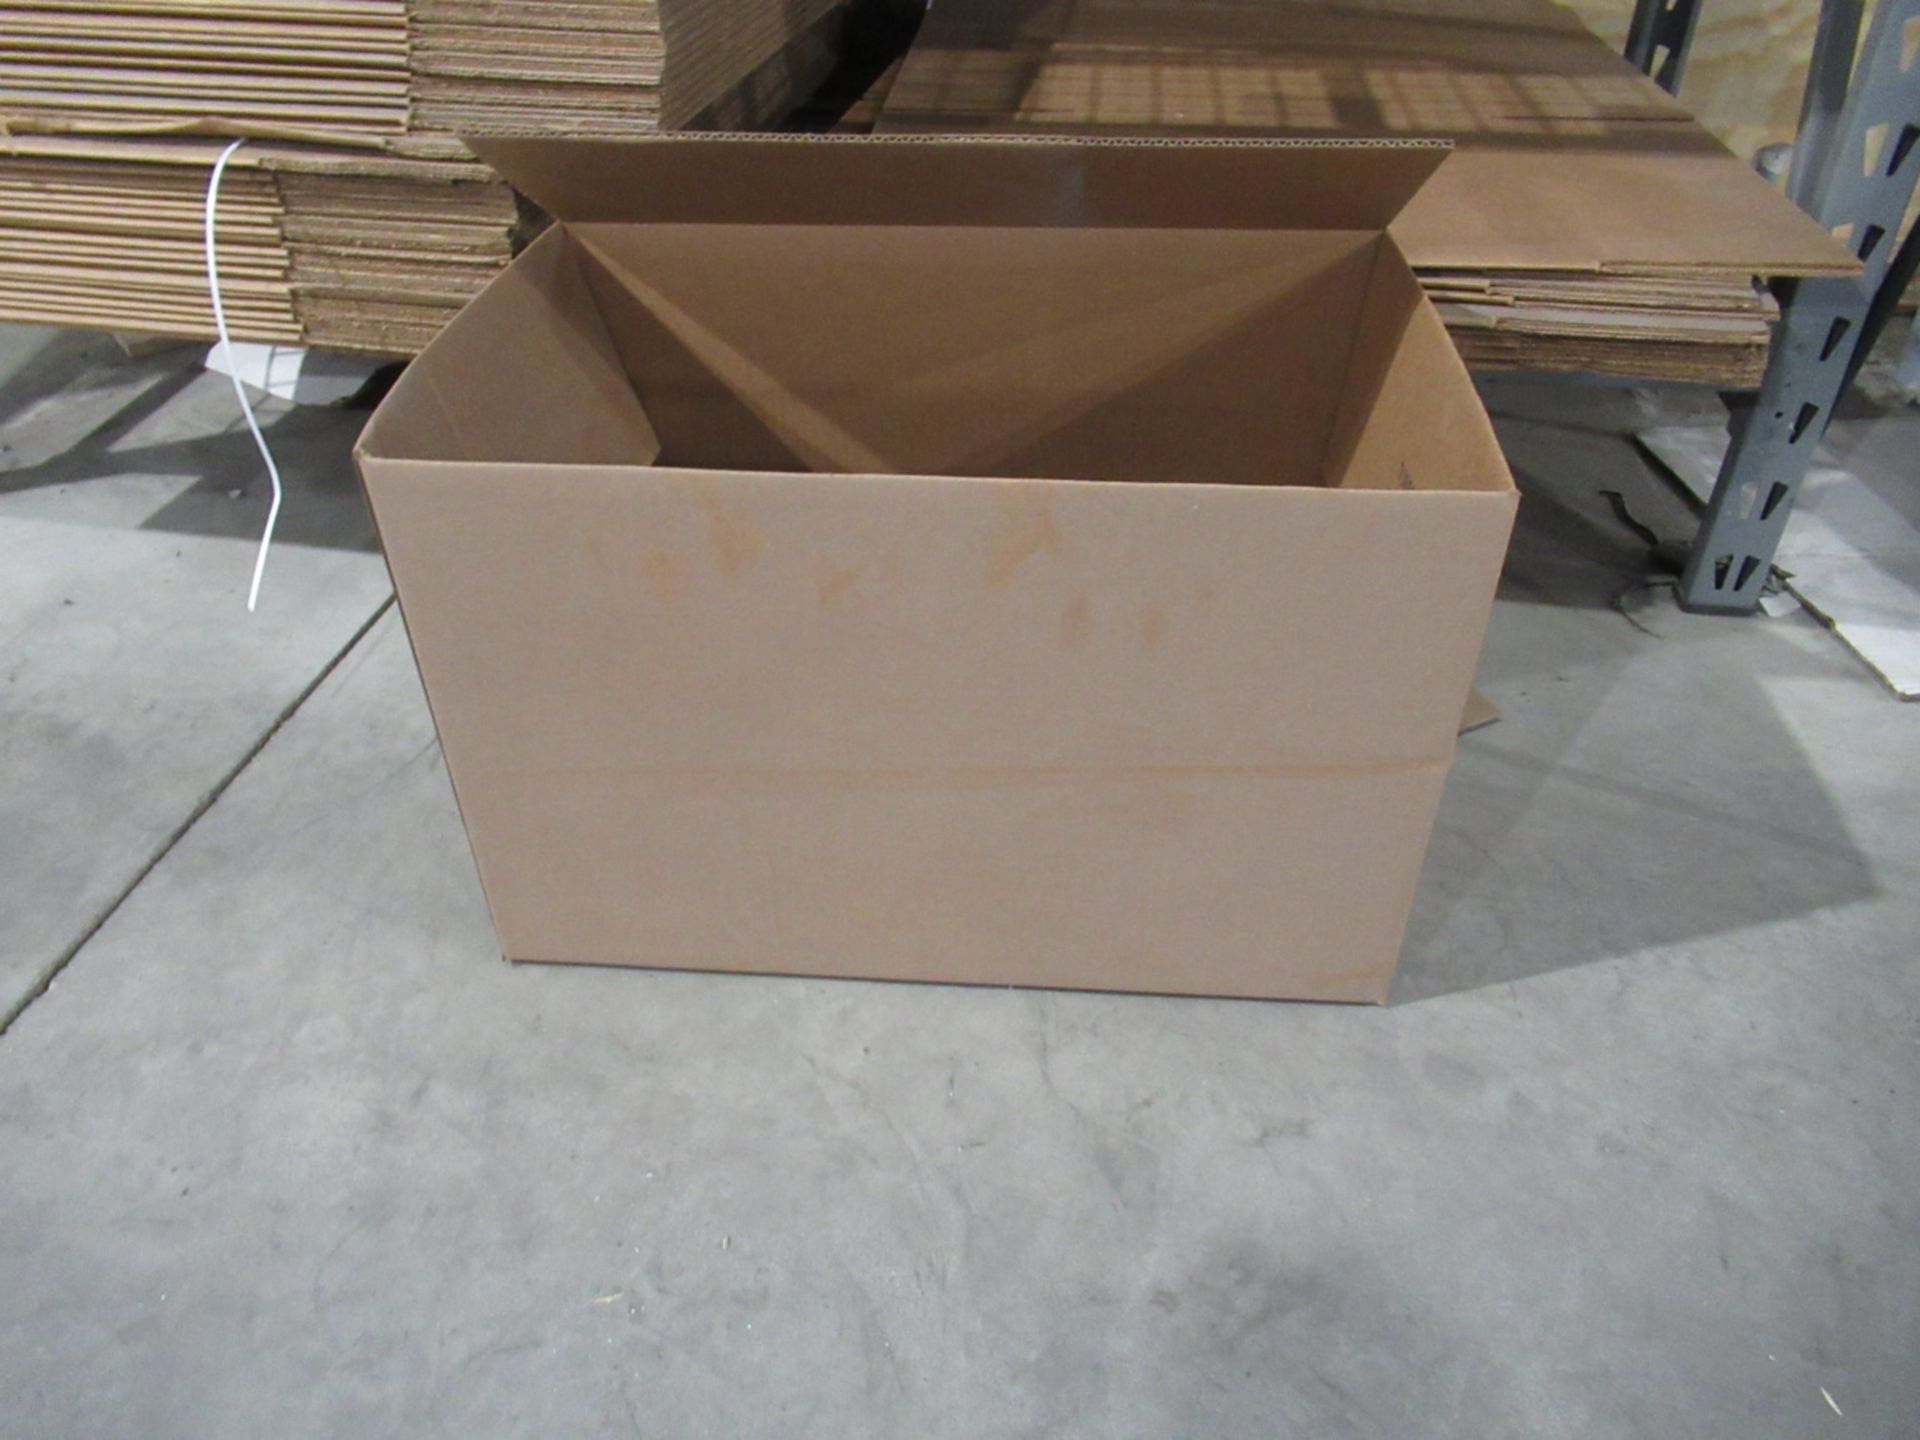 LOT OF 200 24" X 15" X 15" CARDBOARD BOXES